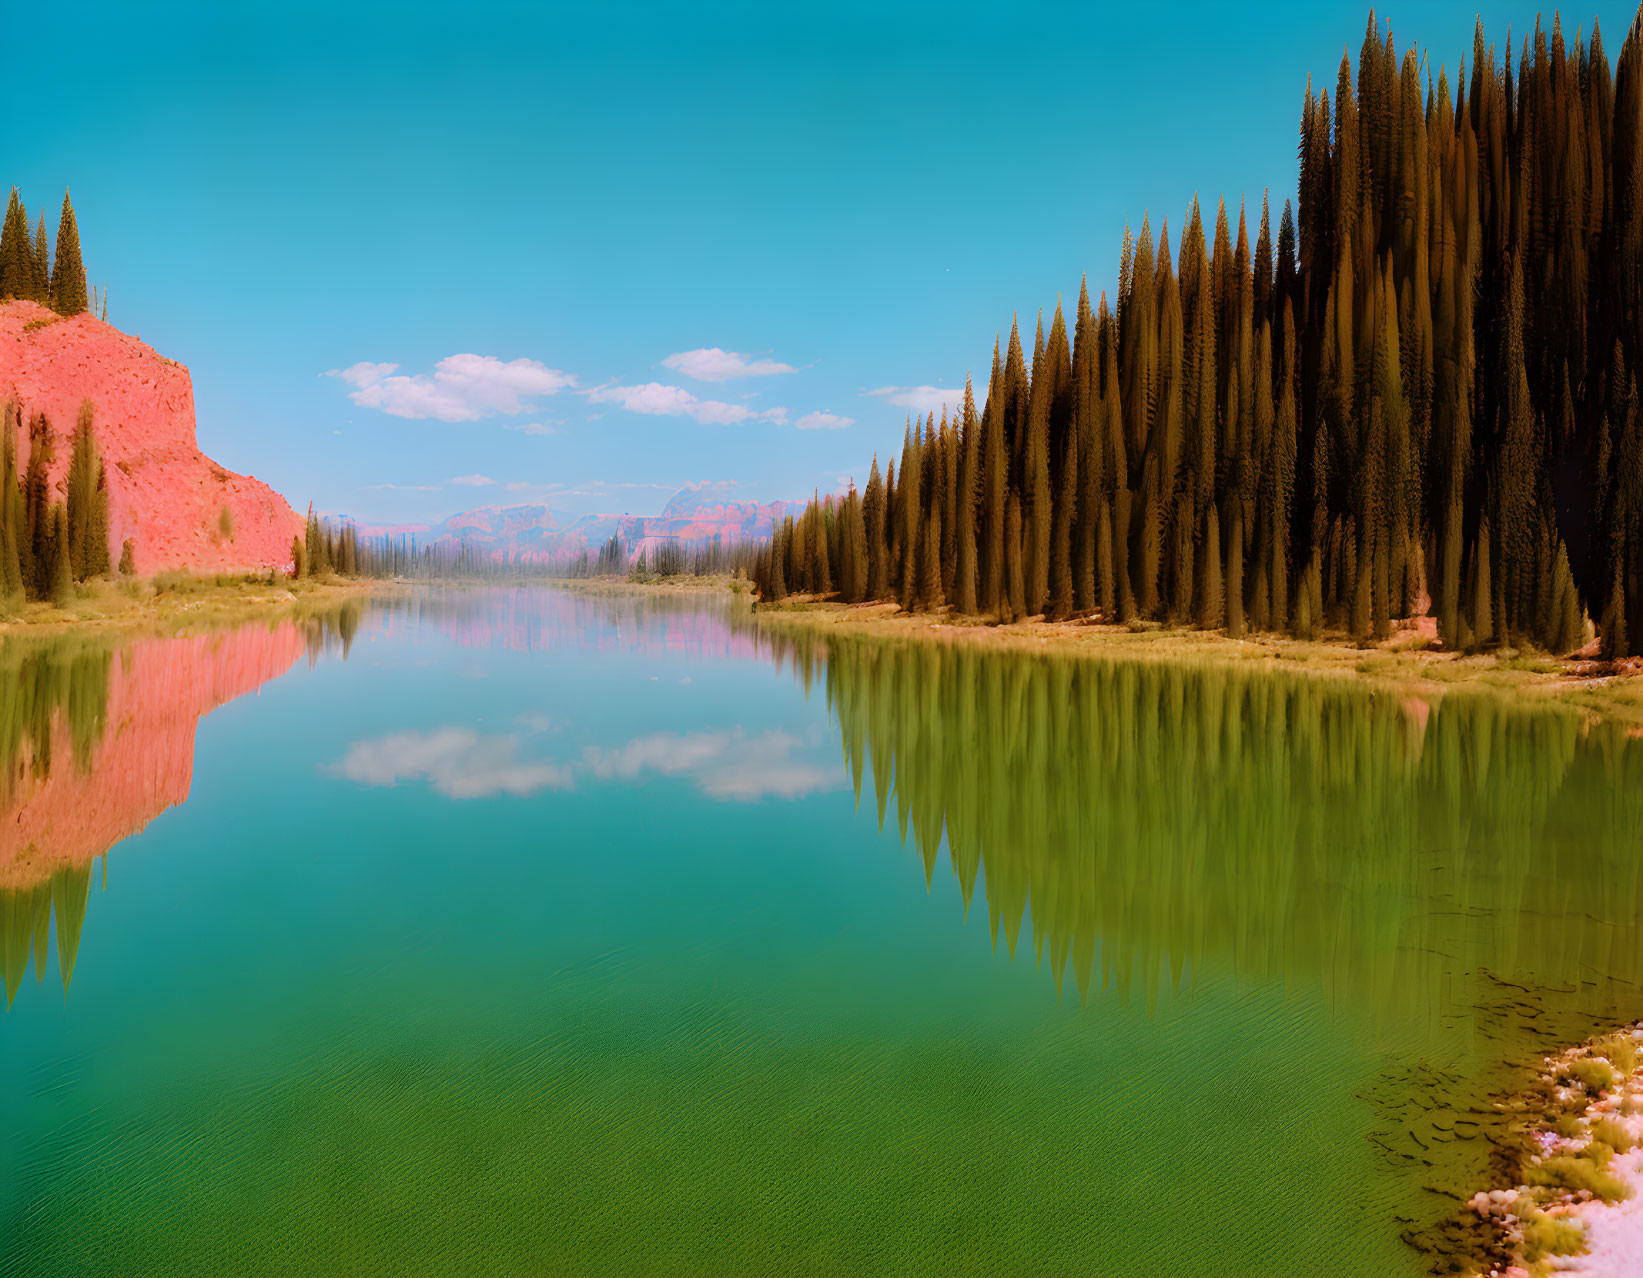 Tranquil lake with pine tree reflections and rugged cliff scenery